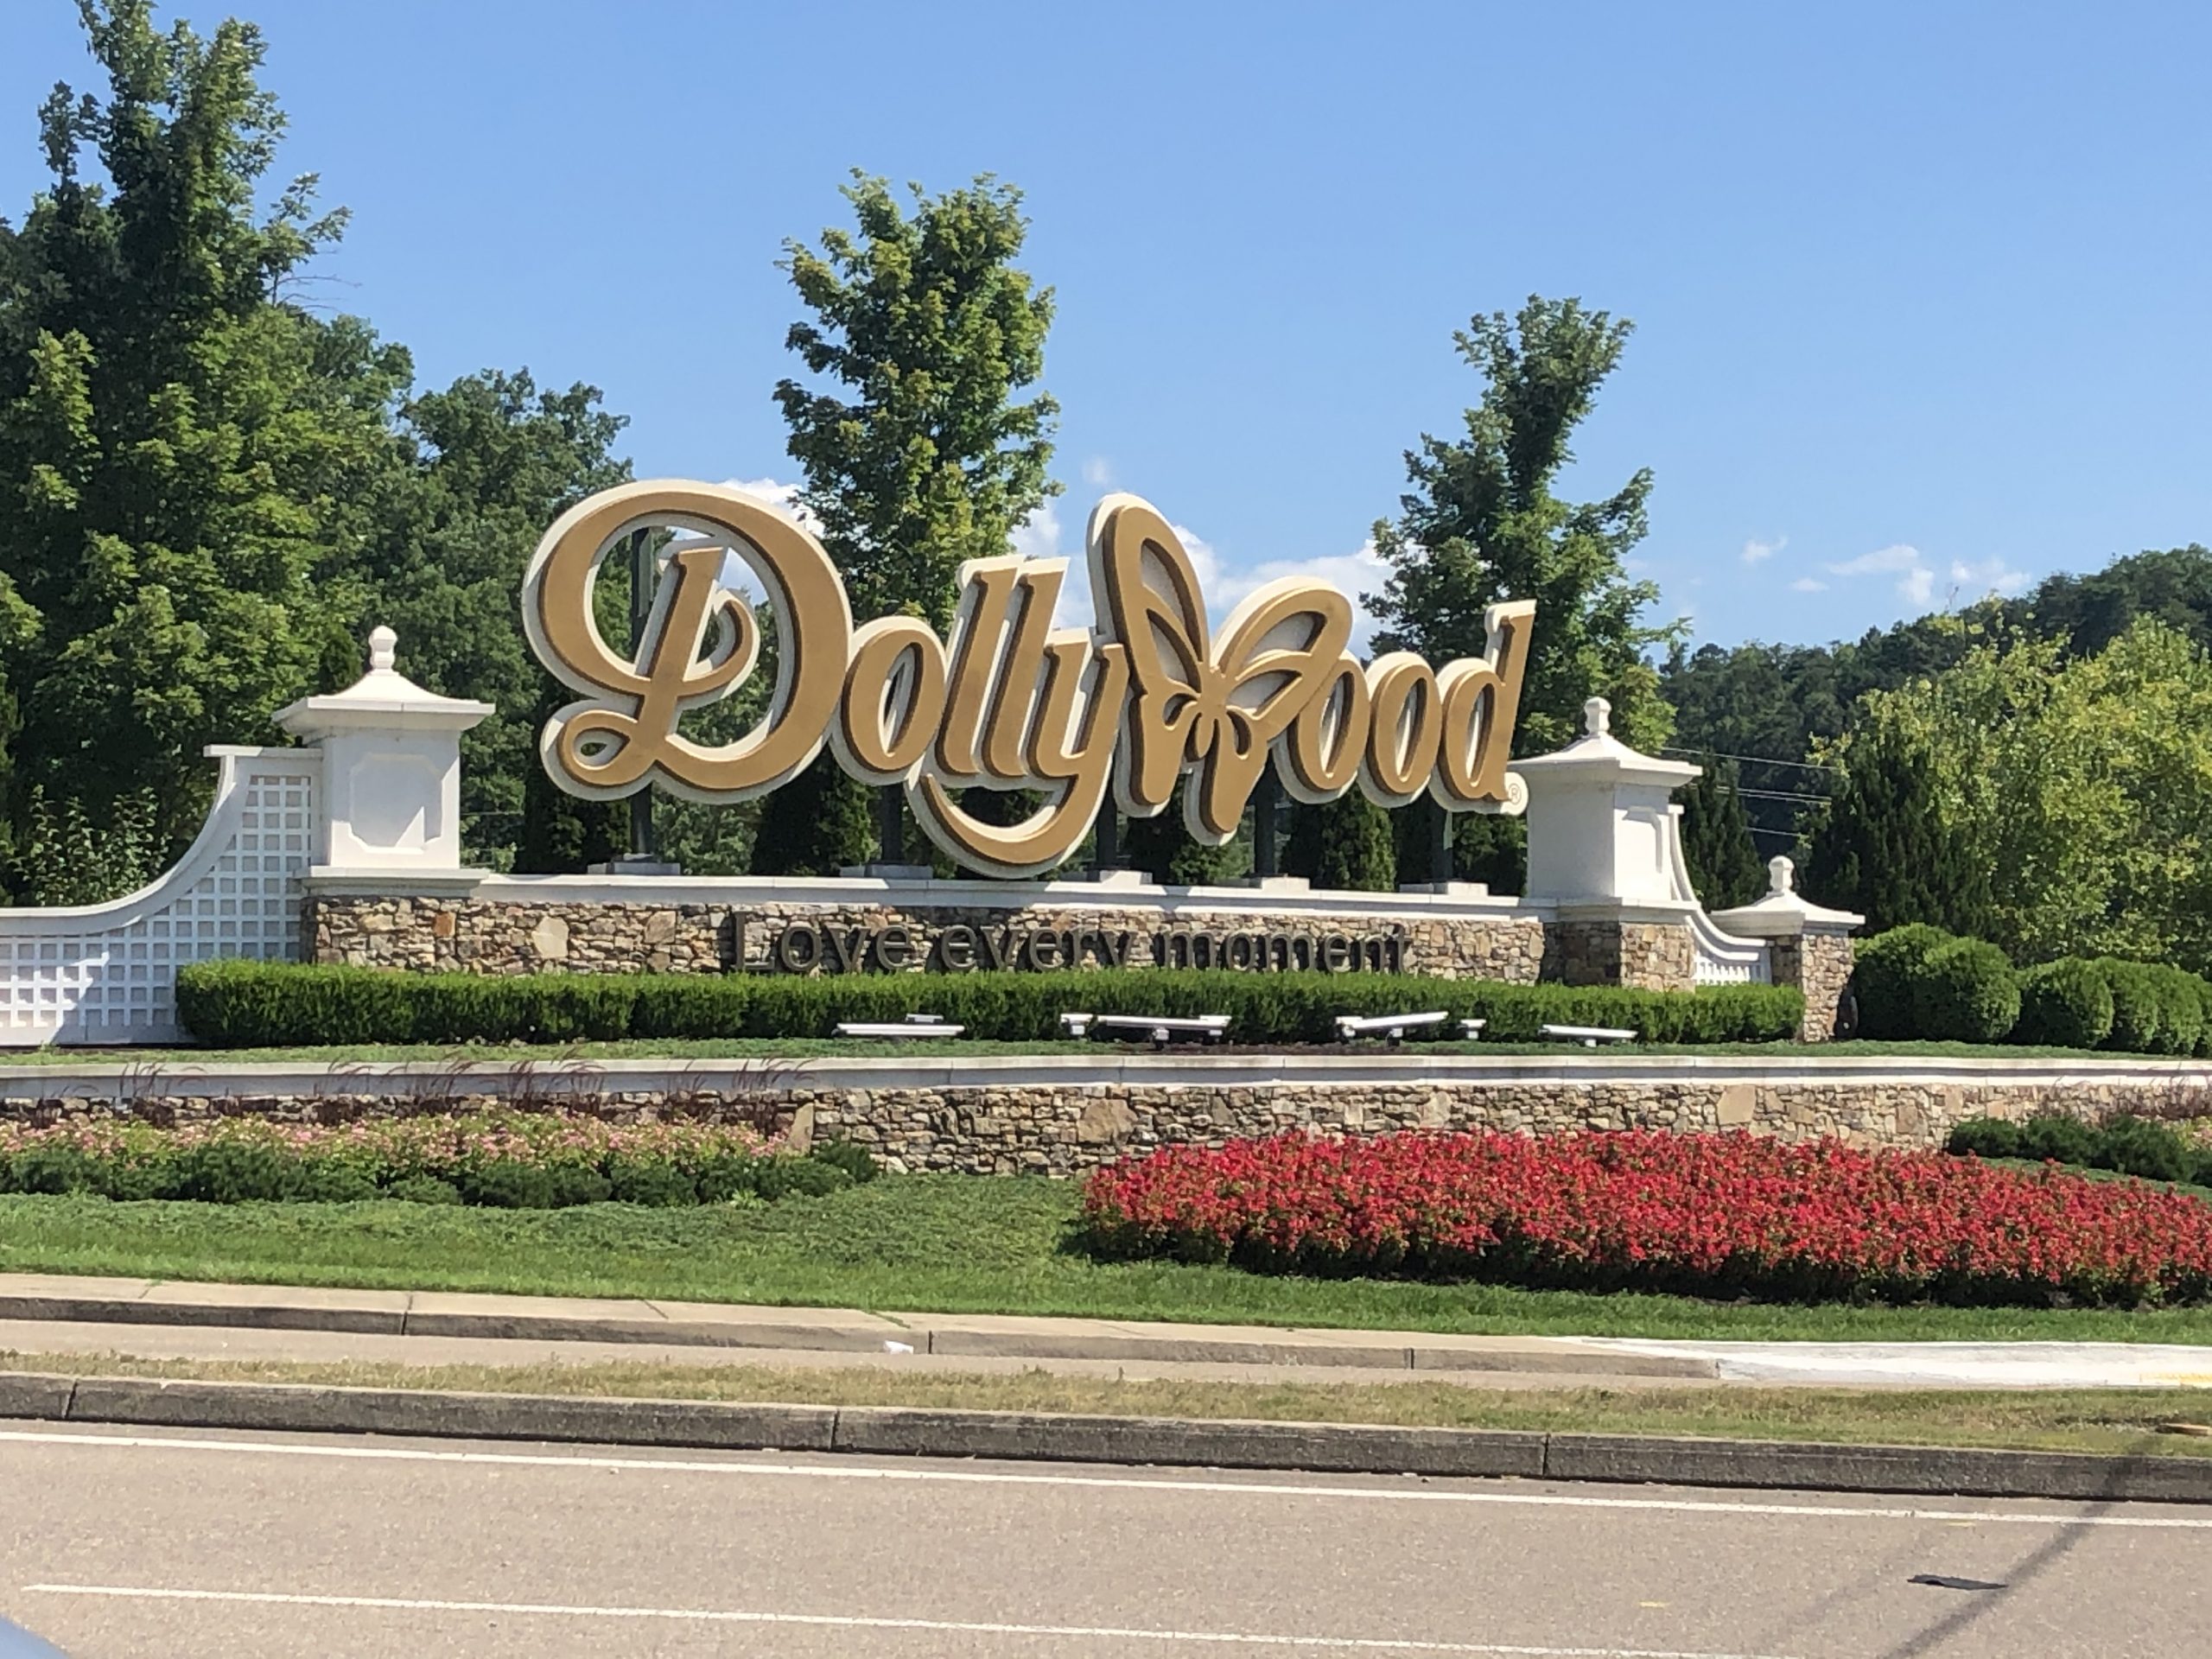 What to Expect at Dollywood Pigeon TN {Dollywood Reviews}